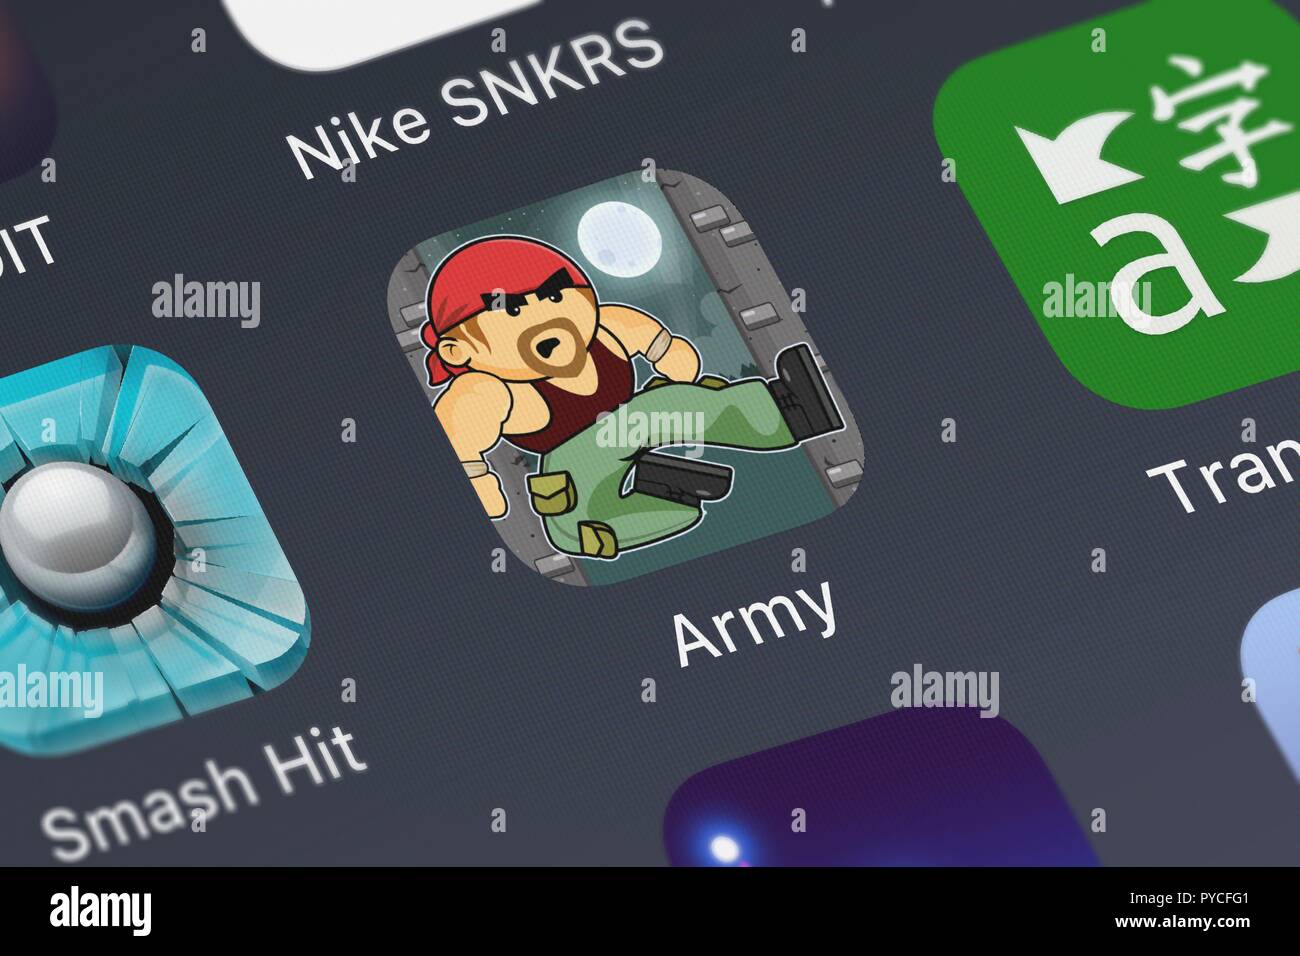 London, United Kingdom - October 26, 2018: Screenshot of the Army Hit, Kick and Punch Like Crazy mobile app from Pop-ok.com icon on an iPhone. Stock Photo